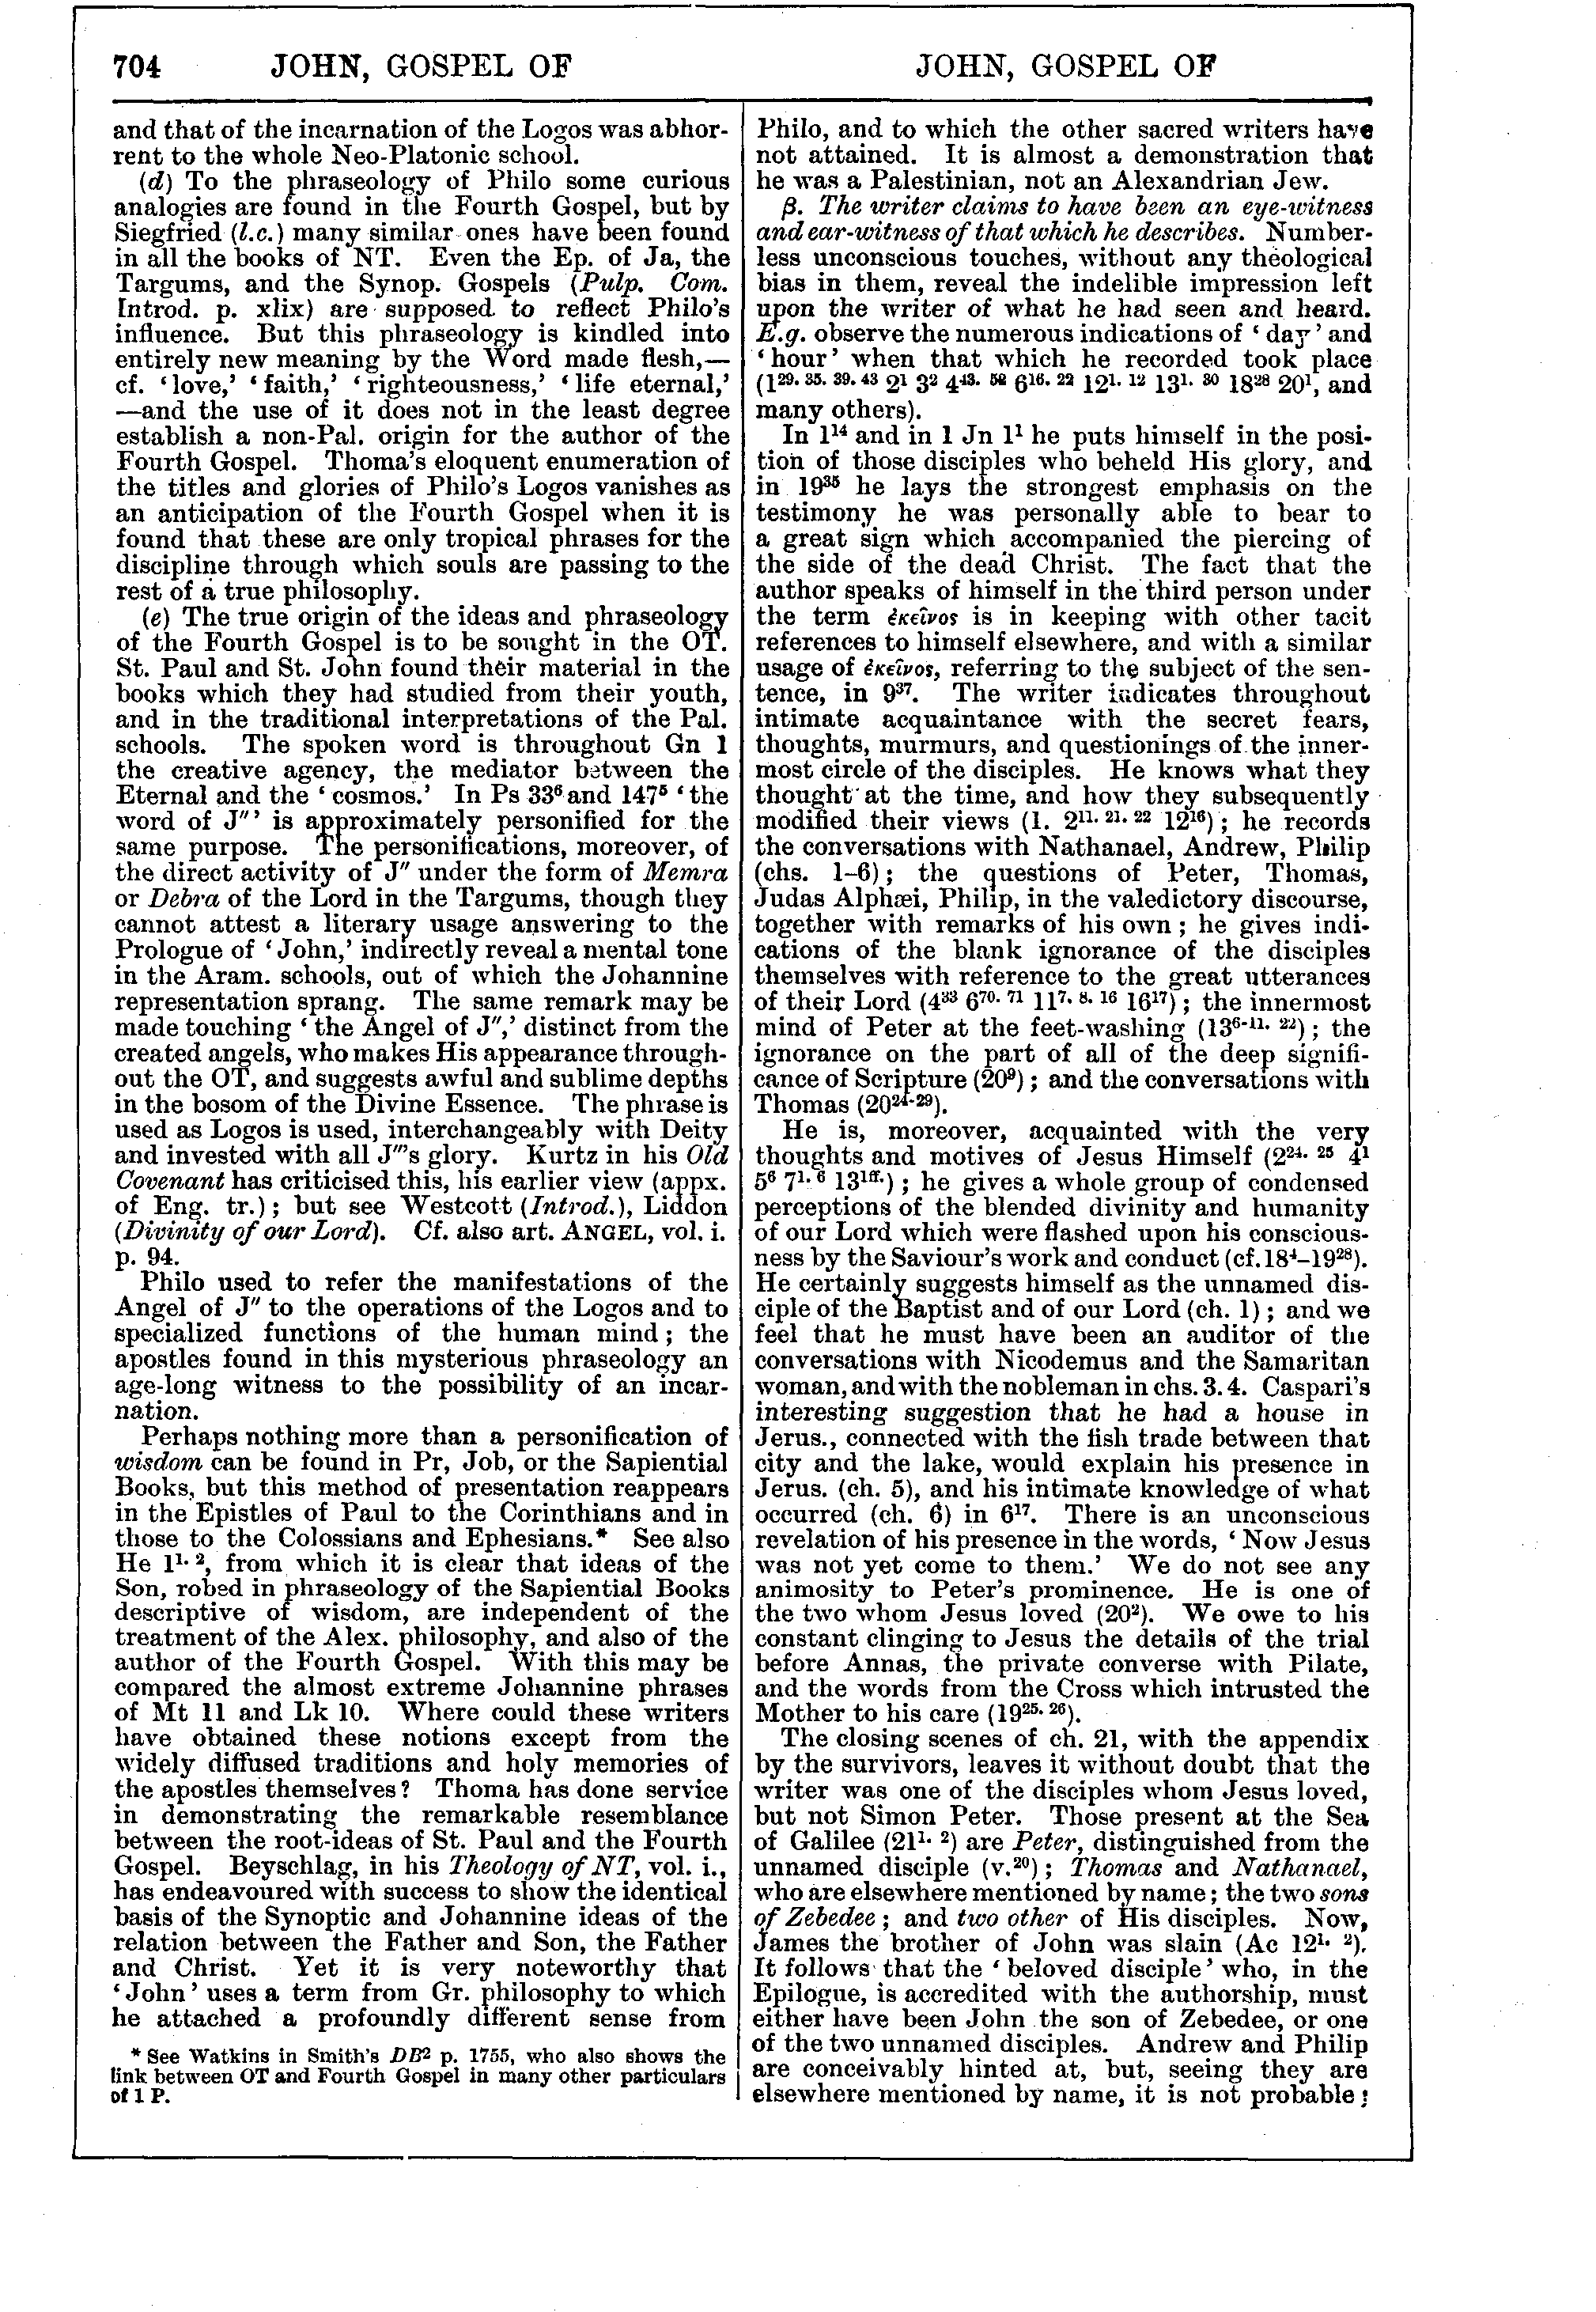 Image of page 704